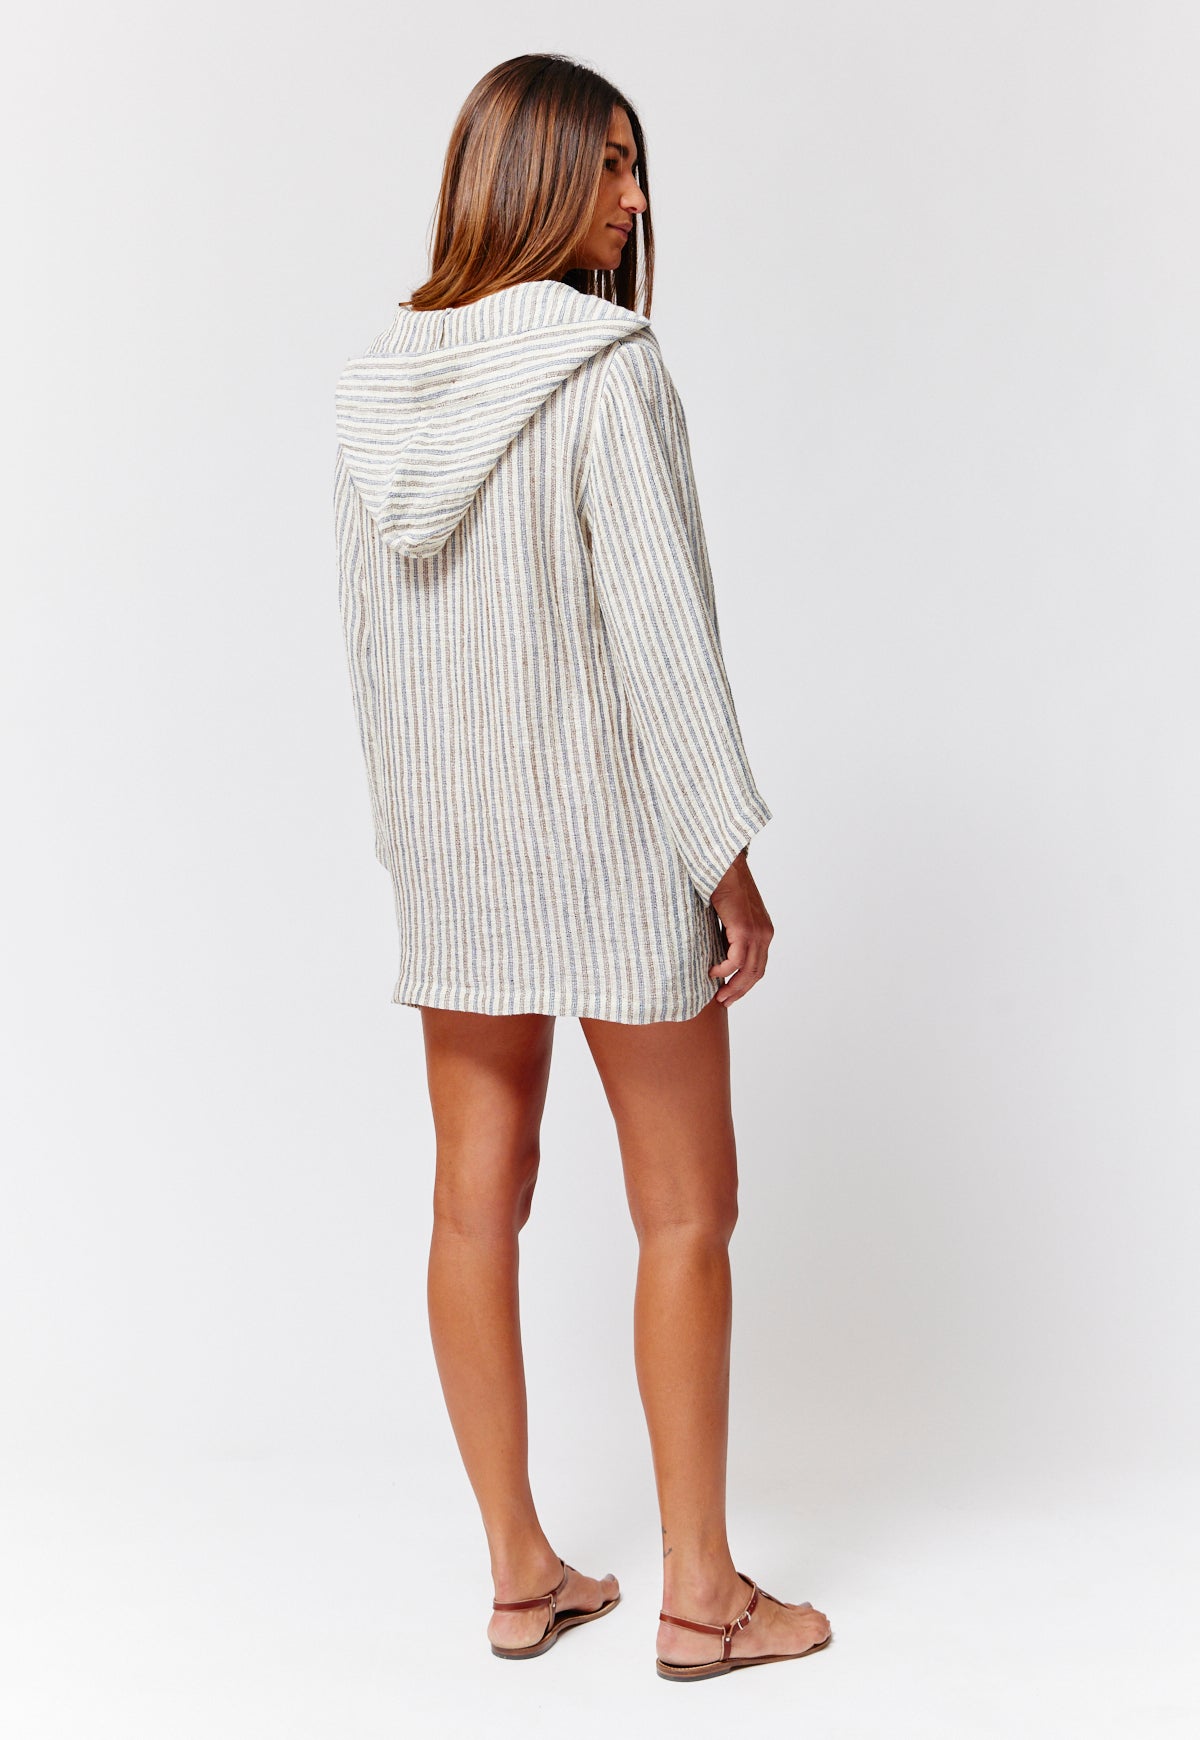 THE BEACH TUNIC in NATURAL/NAVY/BROWN STRIPED CHIOS GAUZE